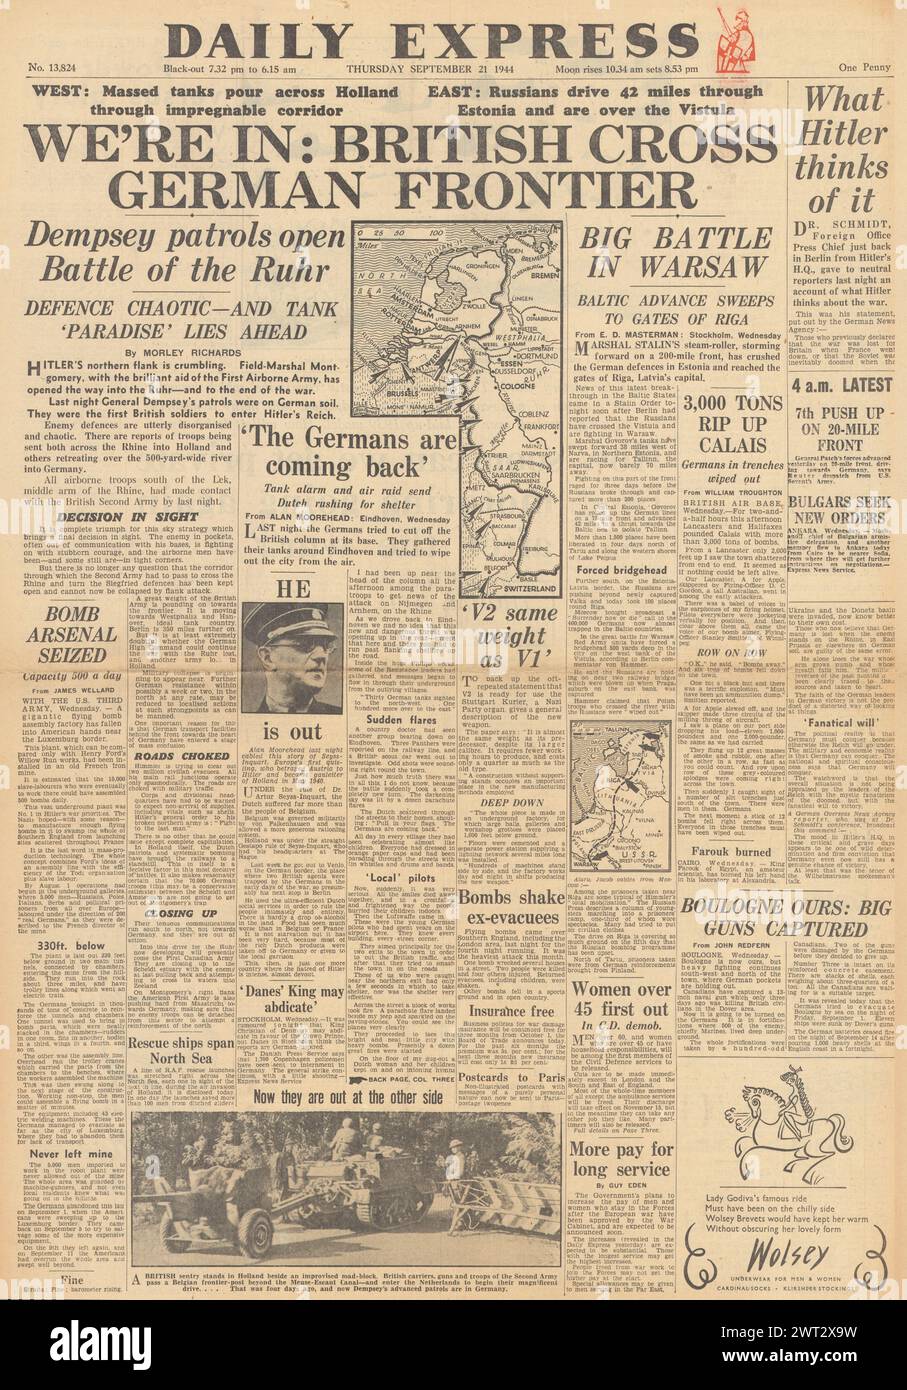 1944 Daily Express front page reporting British forces cross German border, battle of Arnhem and battle for Warsaw Stock Photo